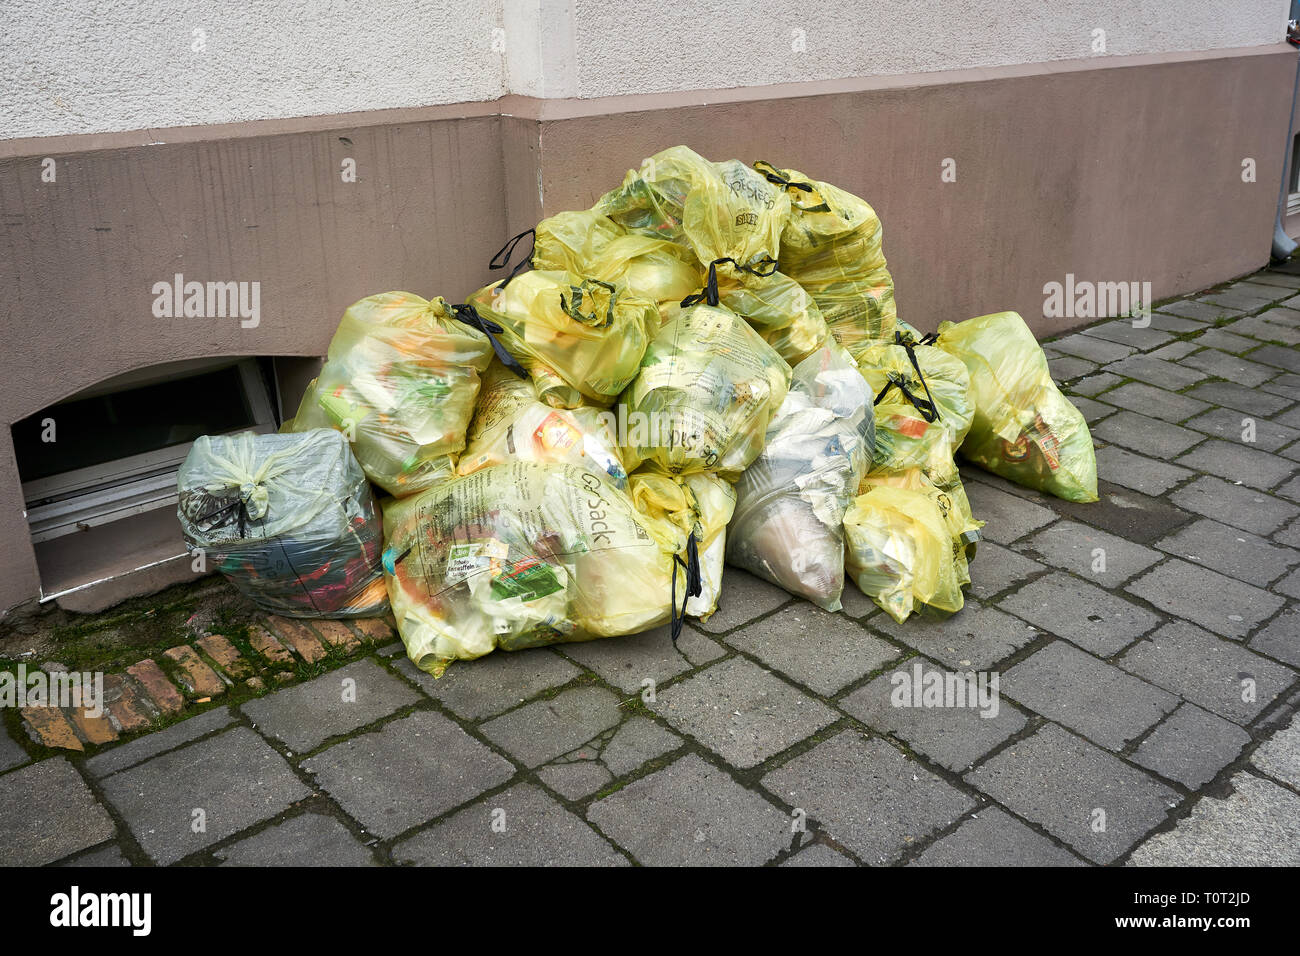 https://c8.alamy.com/comp/T0T2JD/yellow-garbage-bag-with-garbage-in-germany-T0T2JD.jpg